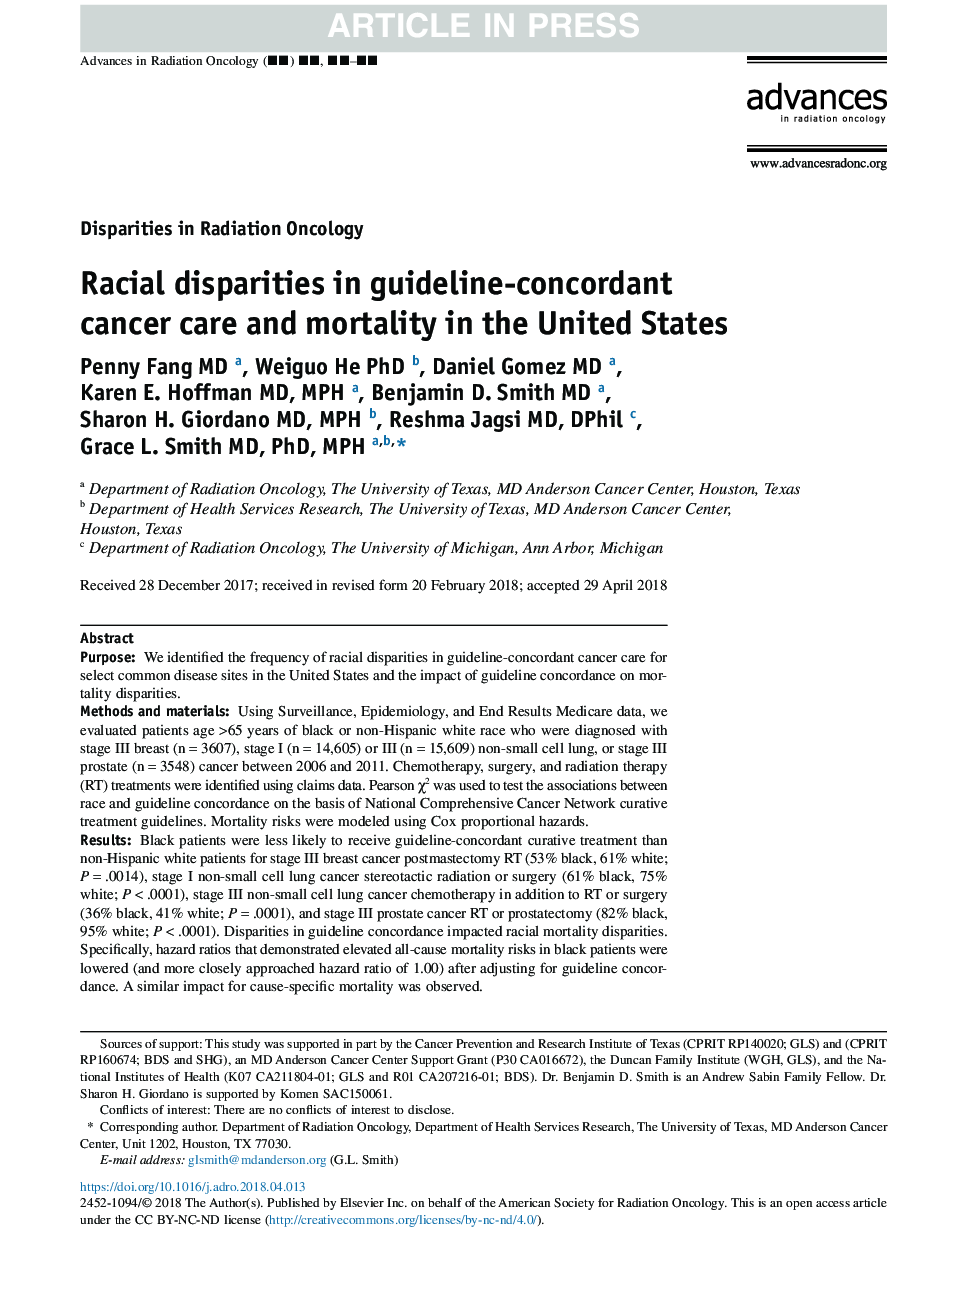 Racial disparities in guideline-concordant cancer care and mortality in the United States